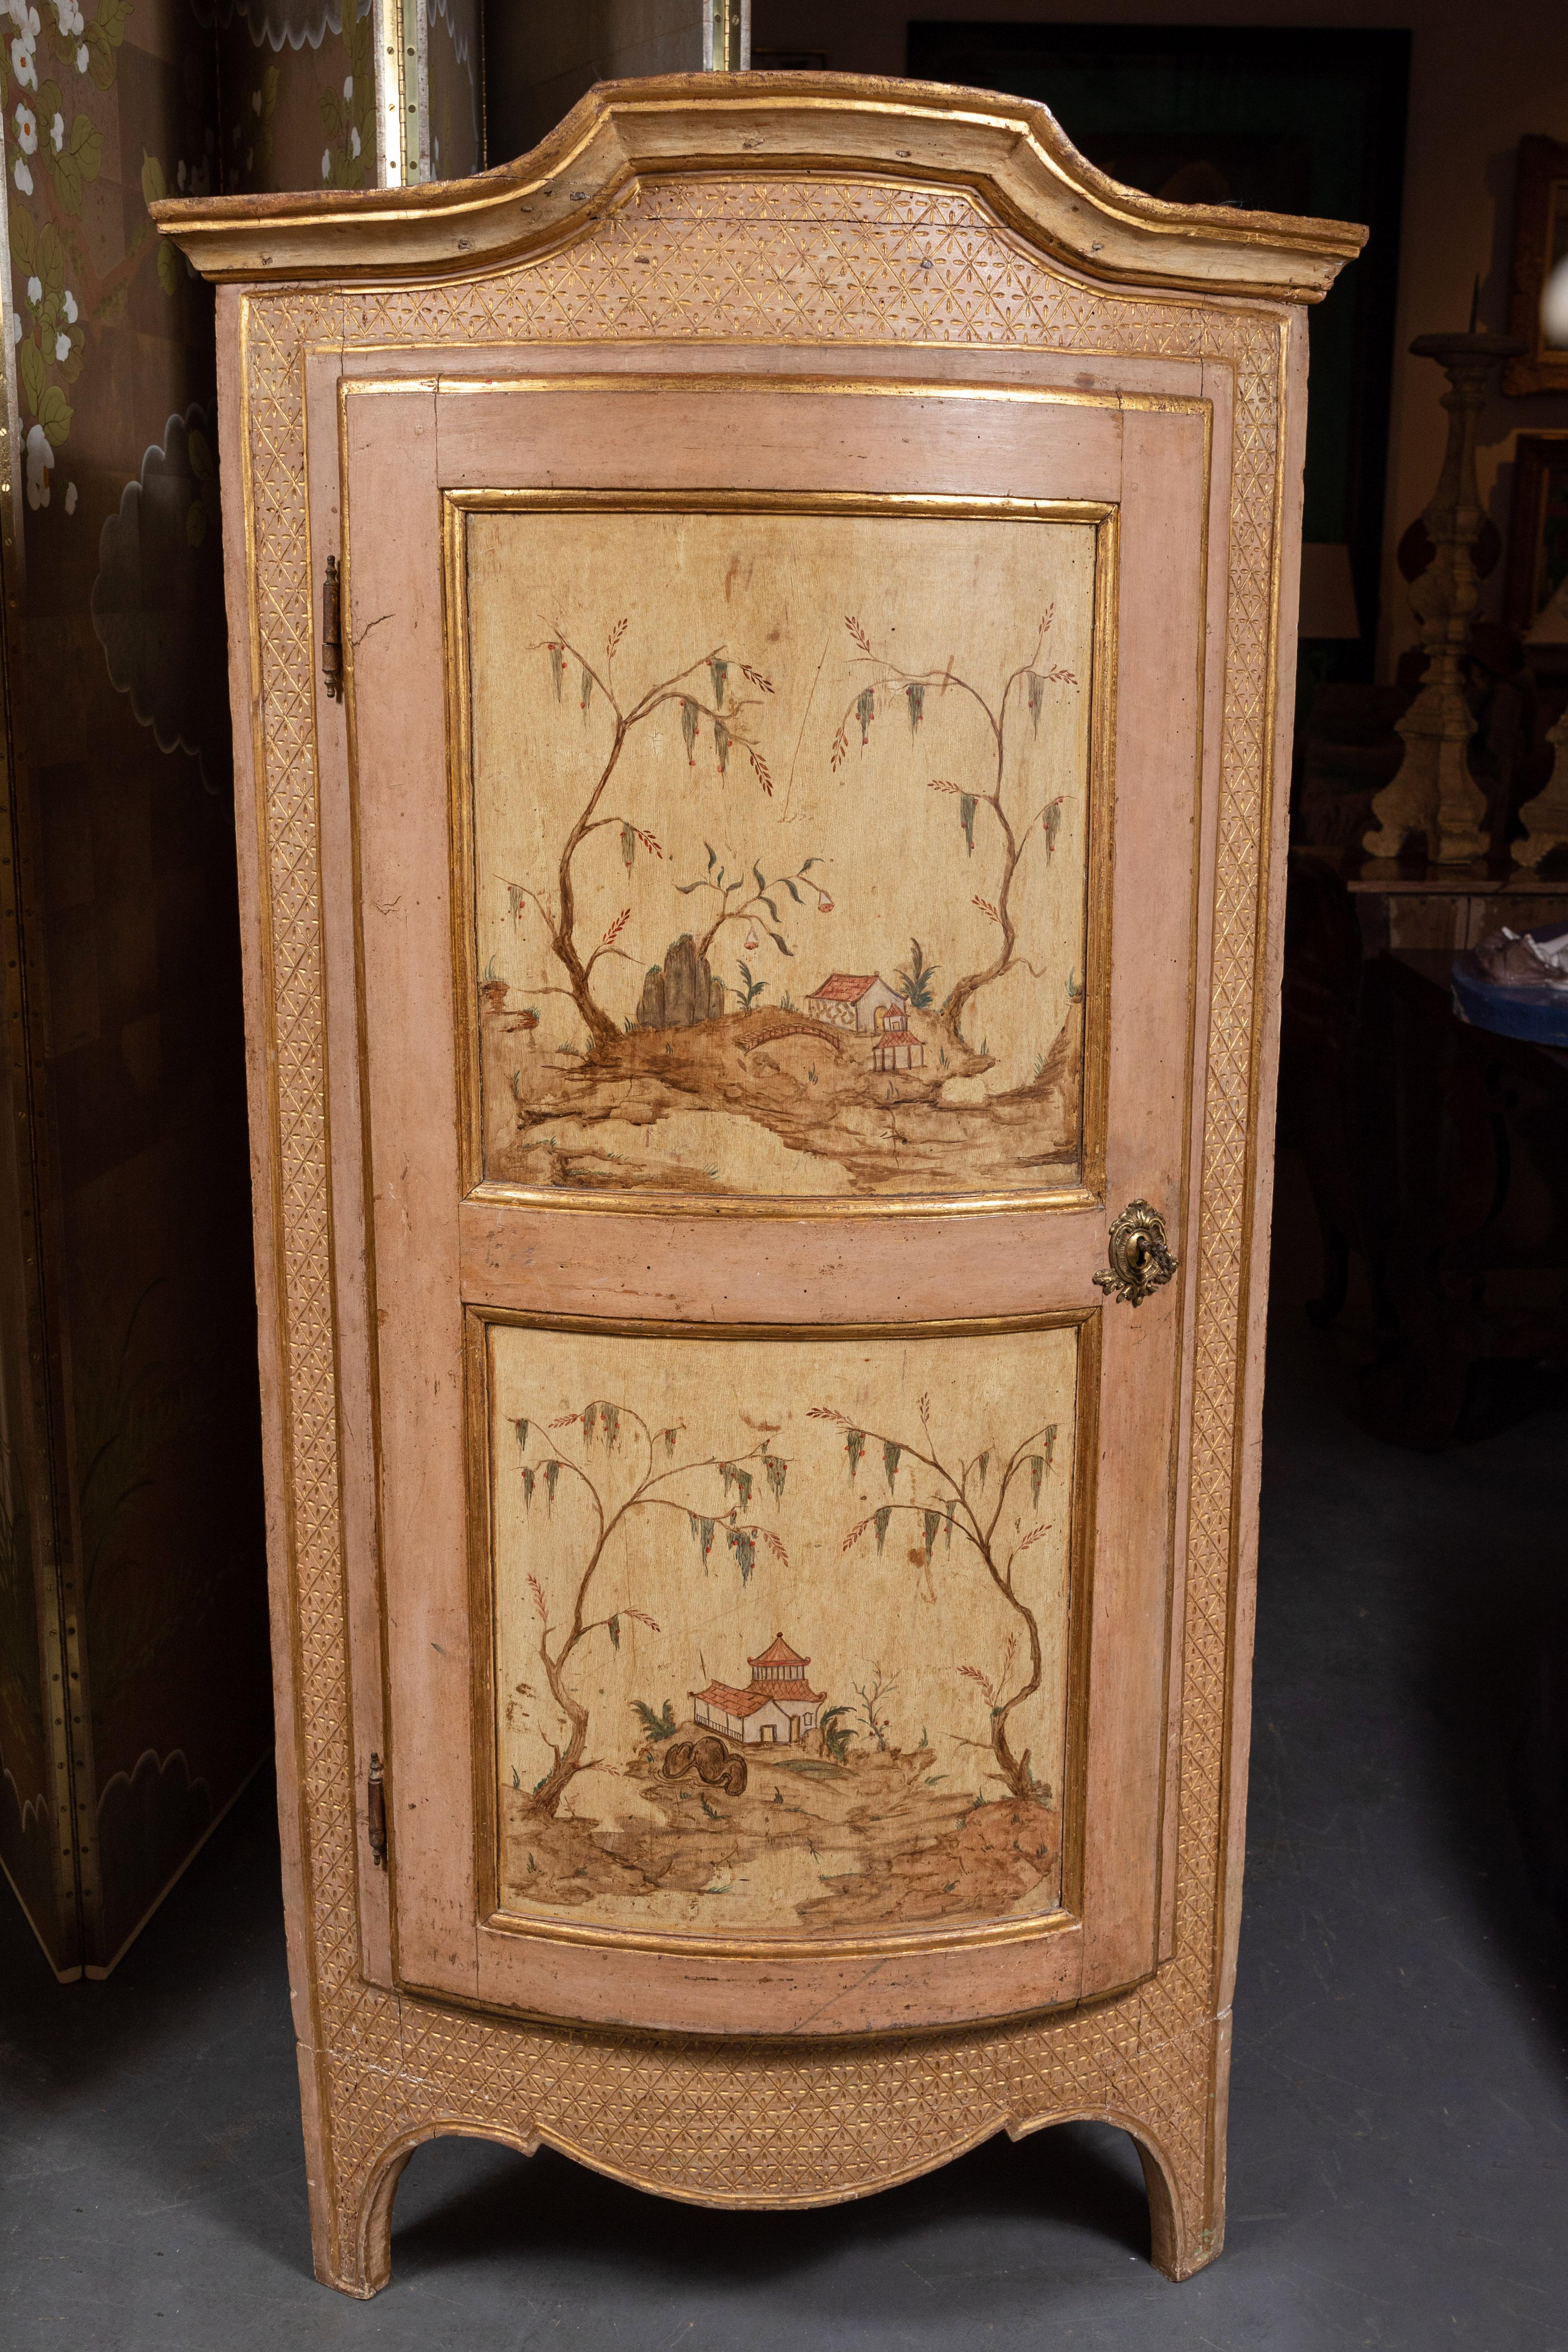 Pair of fine, circa 1750, hand carved and painted, rounded, Venetian, Chinoiserie corner cabinets in blush and crème. Each featuring two, uniquely painted doors, and surrounded and surmounted by a sunken, quilt-style, gilded relief pattern.